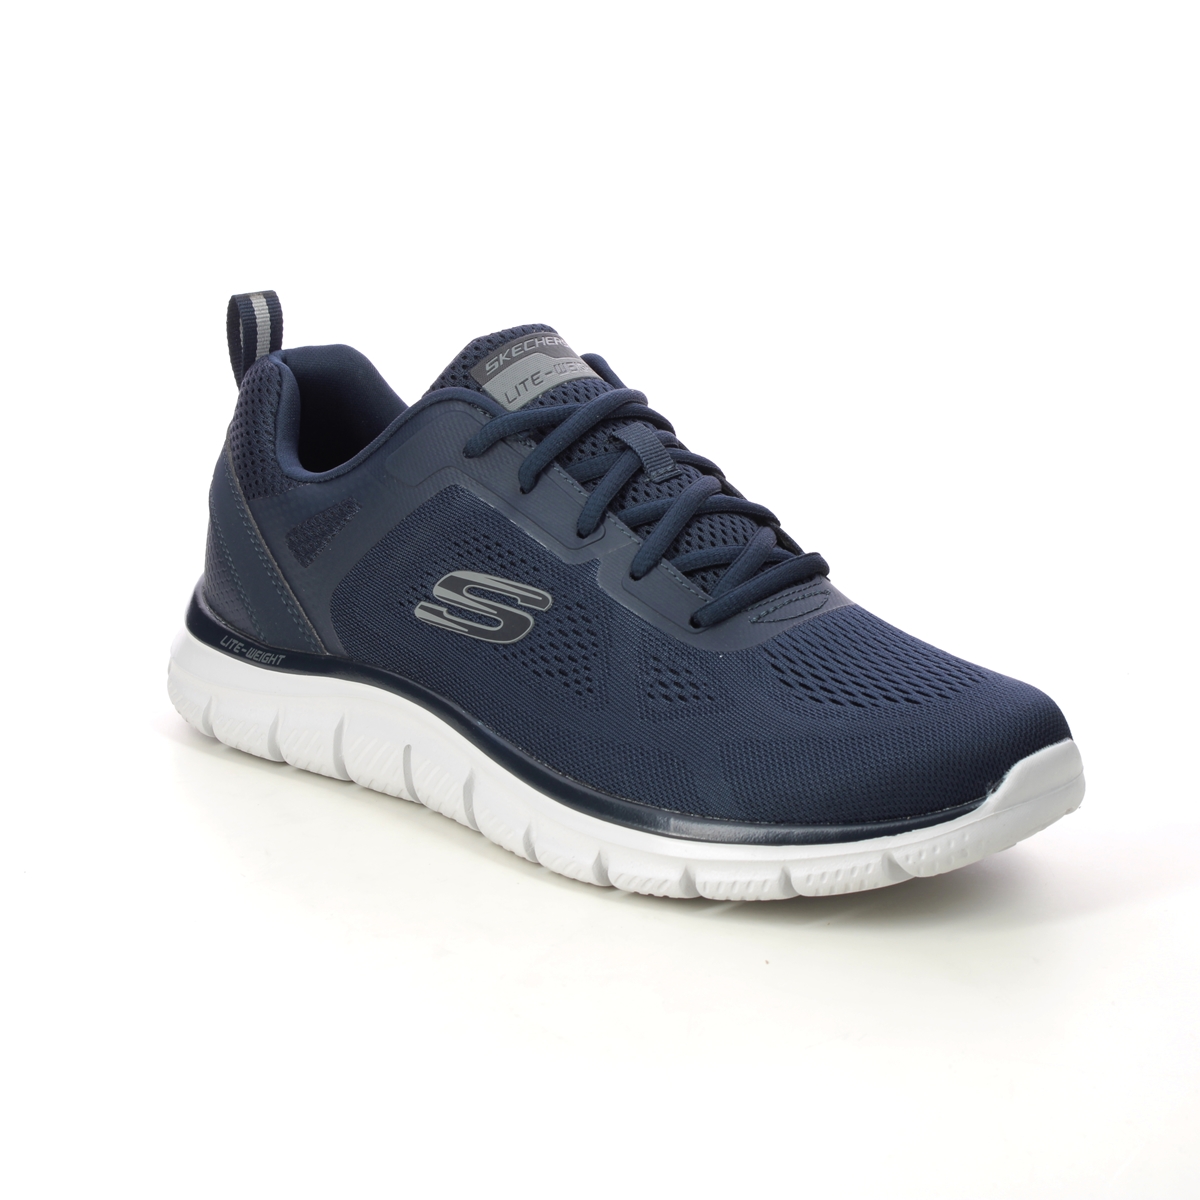 Skechers Track Broader NVY Navy Mens trainers 232698 in a Plain Textile in Size 6